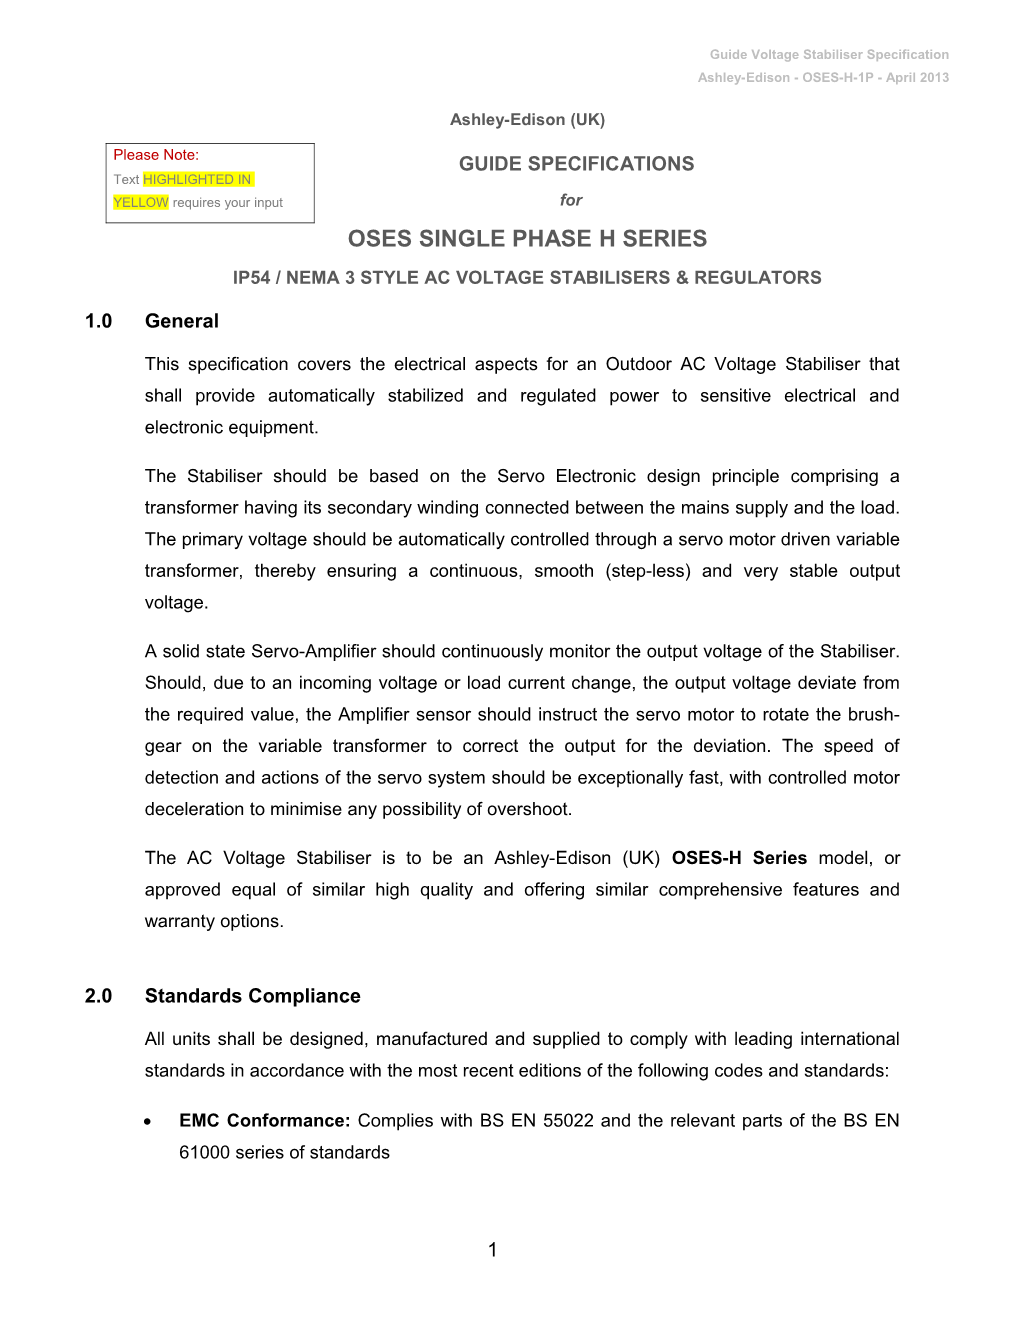 Guide Specification for Ashley-Edison OSES Single Phase AC Voltage Stabilisers